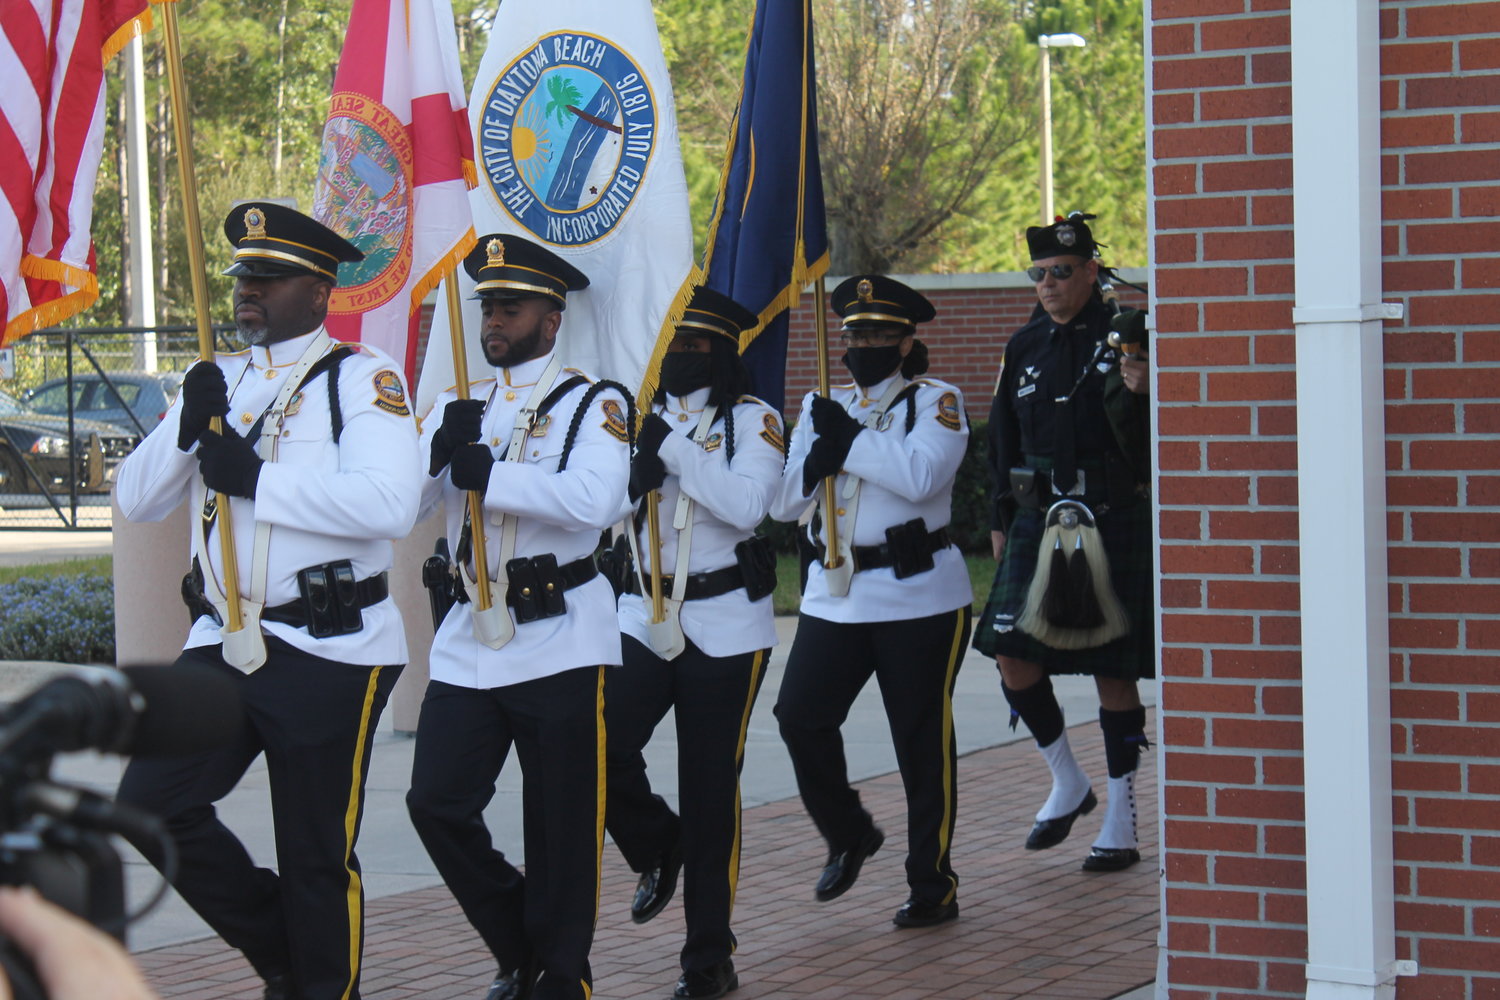 DBPD's Honor Guard coming to present colors during the ceremony